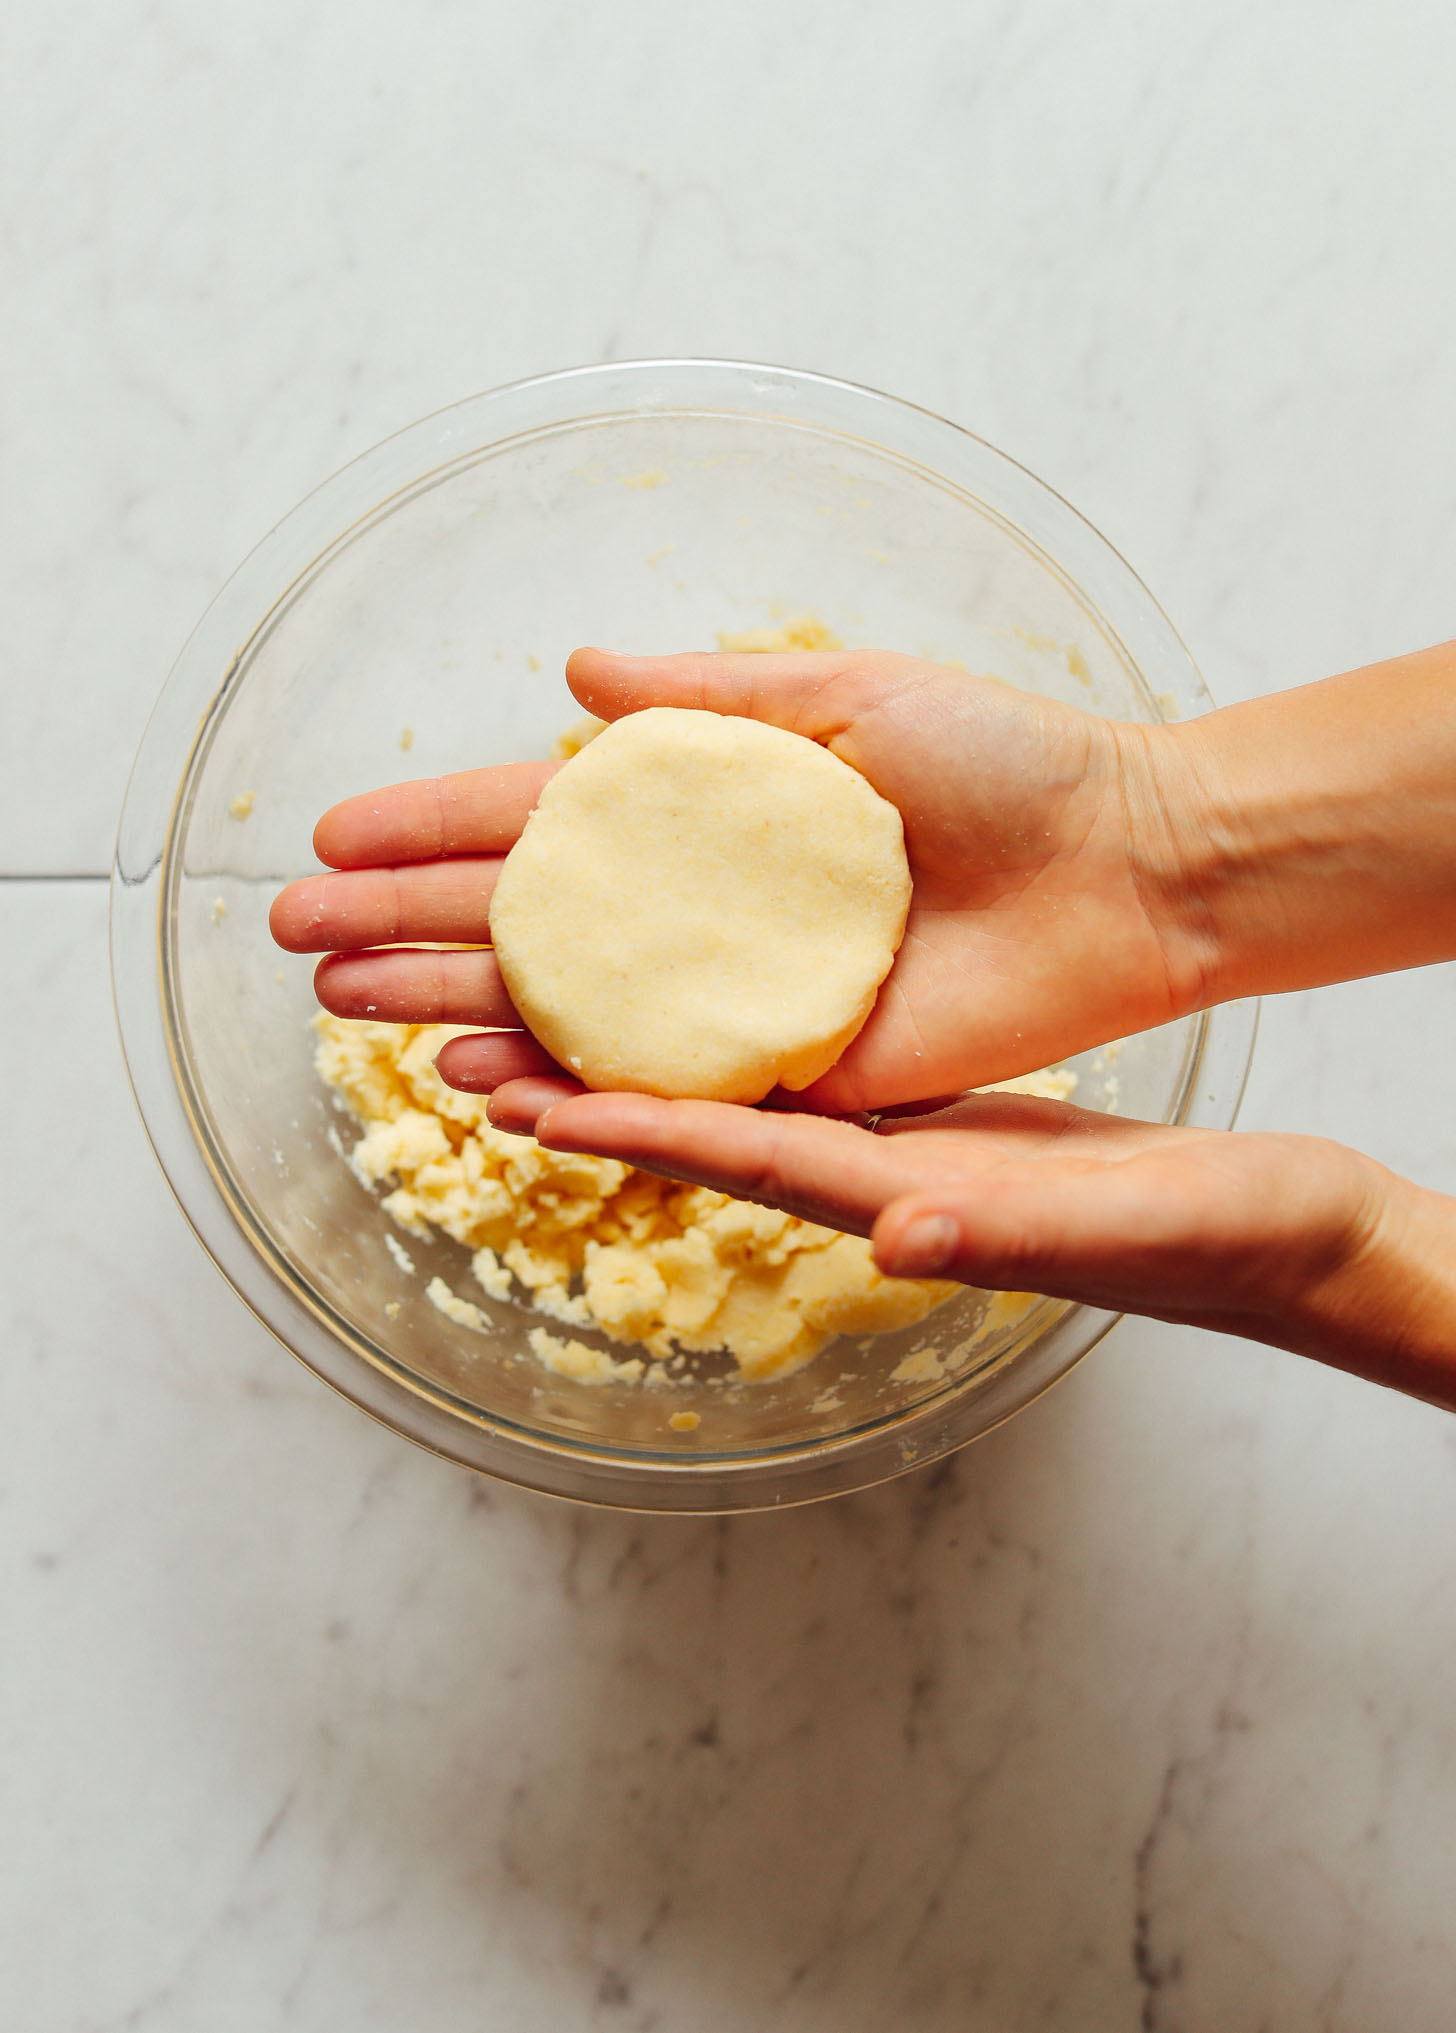 Making arepa dough into a circle by shaping it with my hands